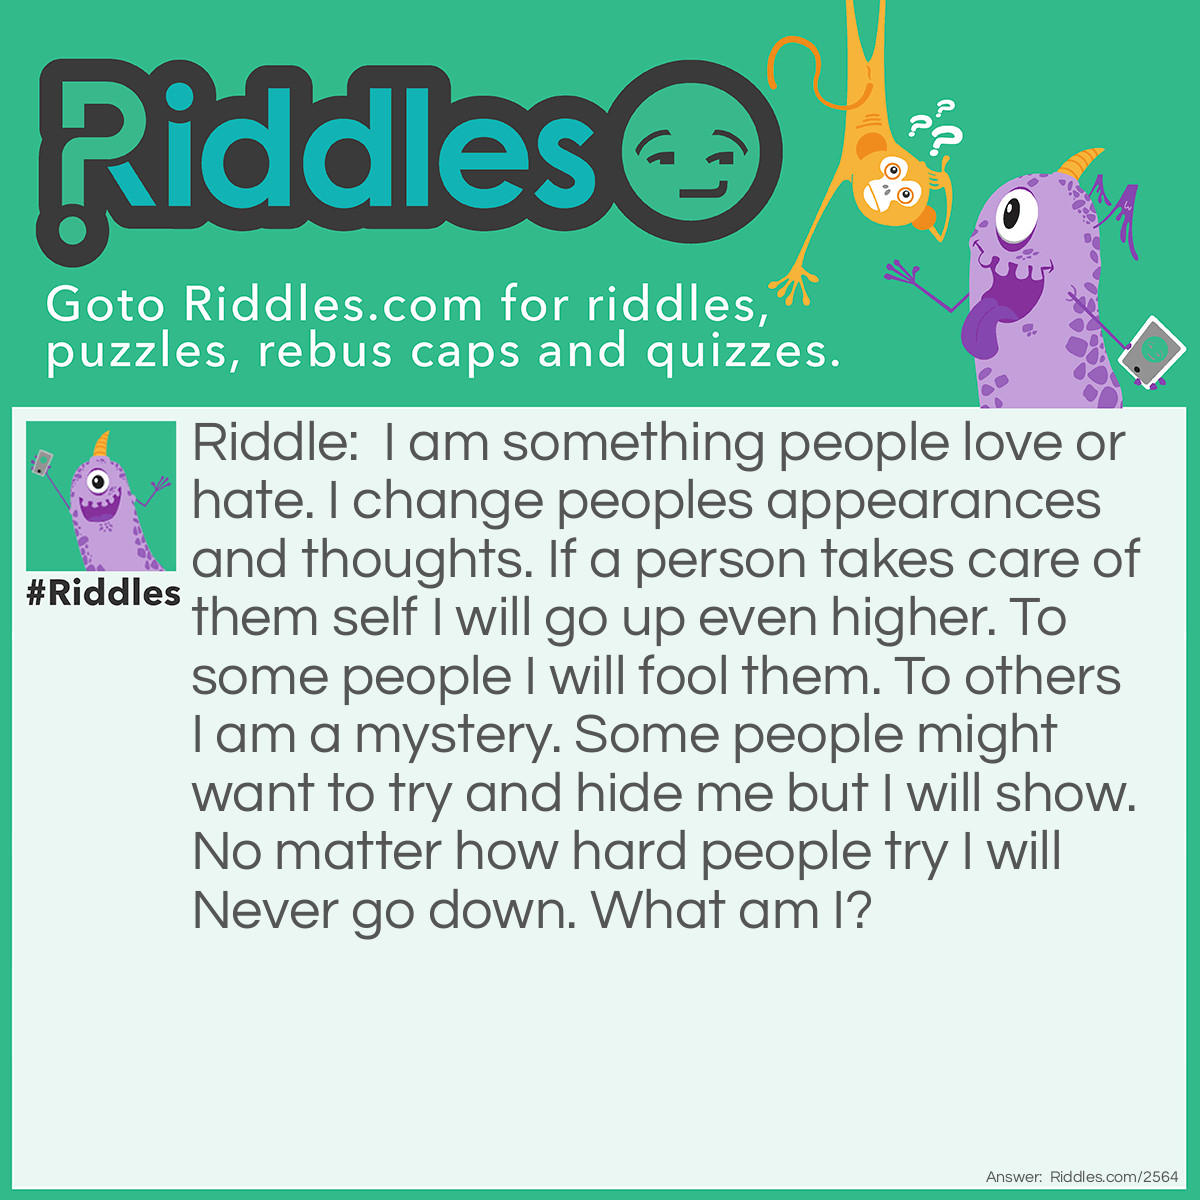 Riddle: I am something people love or hate. I change people's appearances and thoughts. If a person takes care of them self I will go up even higher. To some people, I will fool them. To others, I am a mystery. Some people might want to try and hide me but I will show. No matter how hard people try I will Never go down. What am I? Answer: Age.